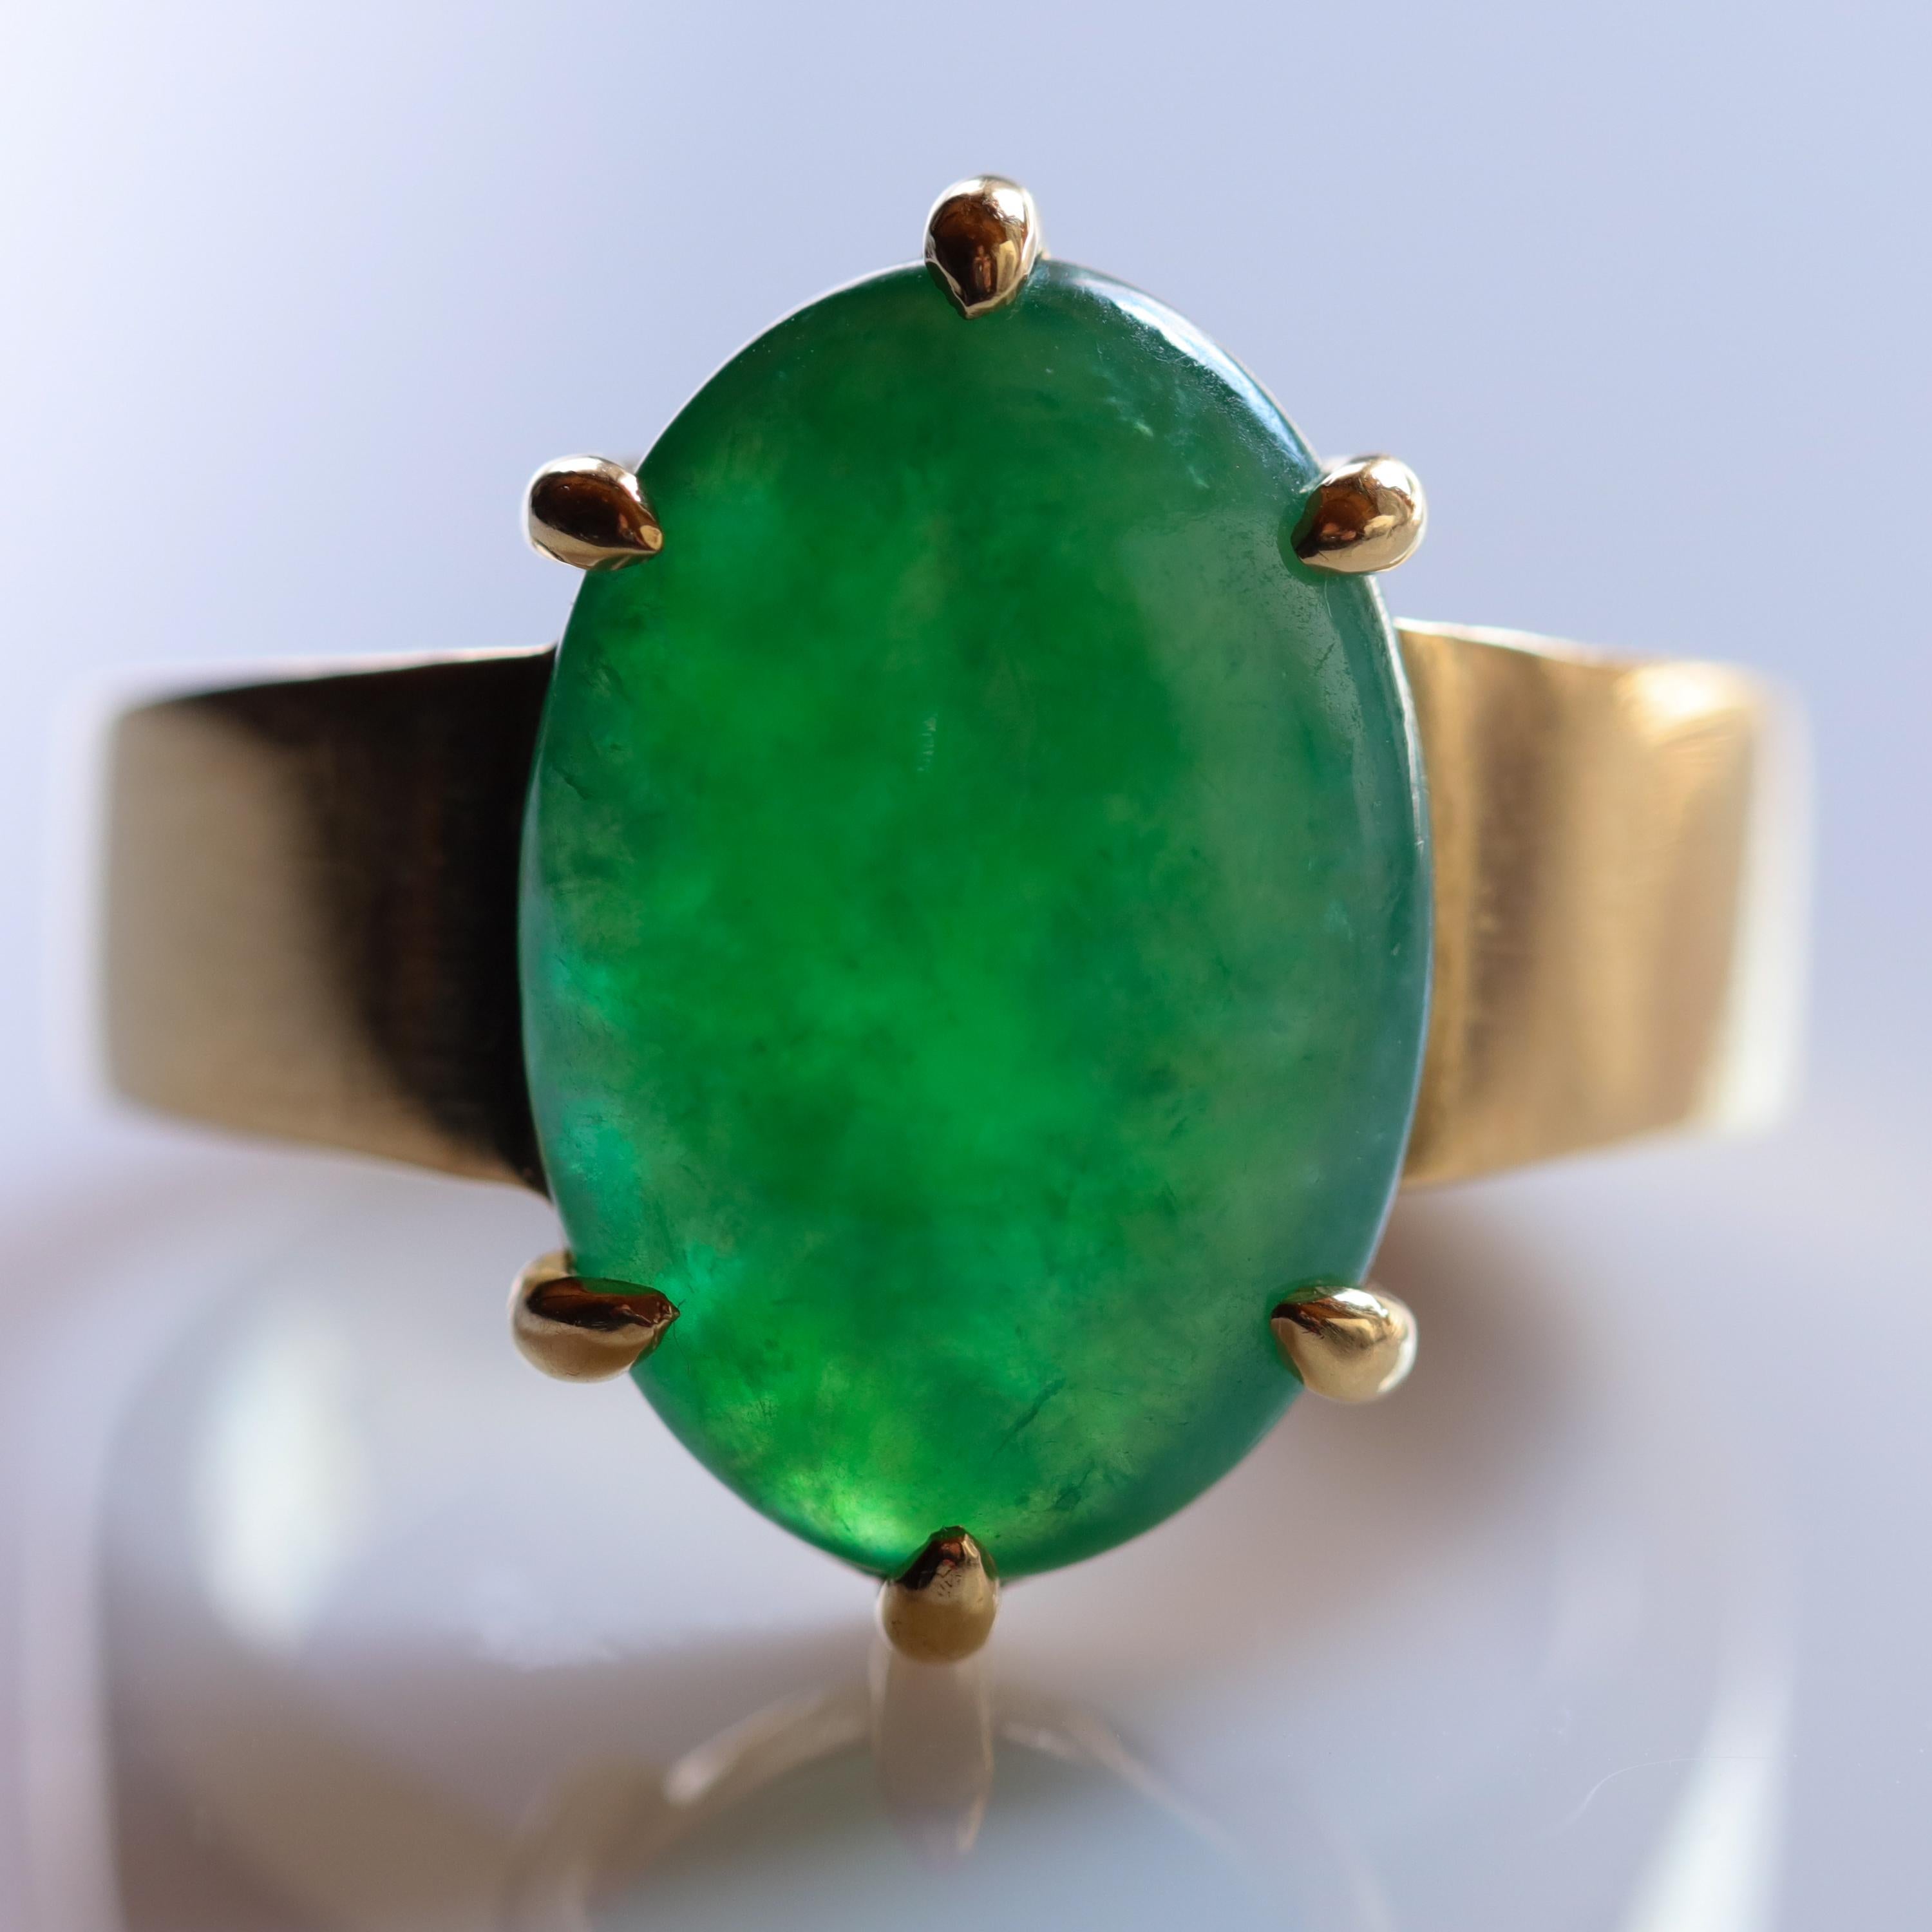 A fine emerald-green Burmese jadeite jade cabochon glows imperially from within its thick, heavy solid 22K gold setting. Six thick claws hold the luminous jade cabochon in place. This magnificent and exceedingly rare jade ring is so extraordinary,